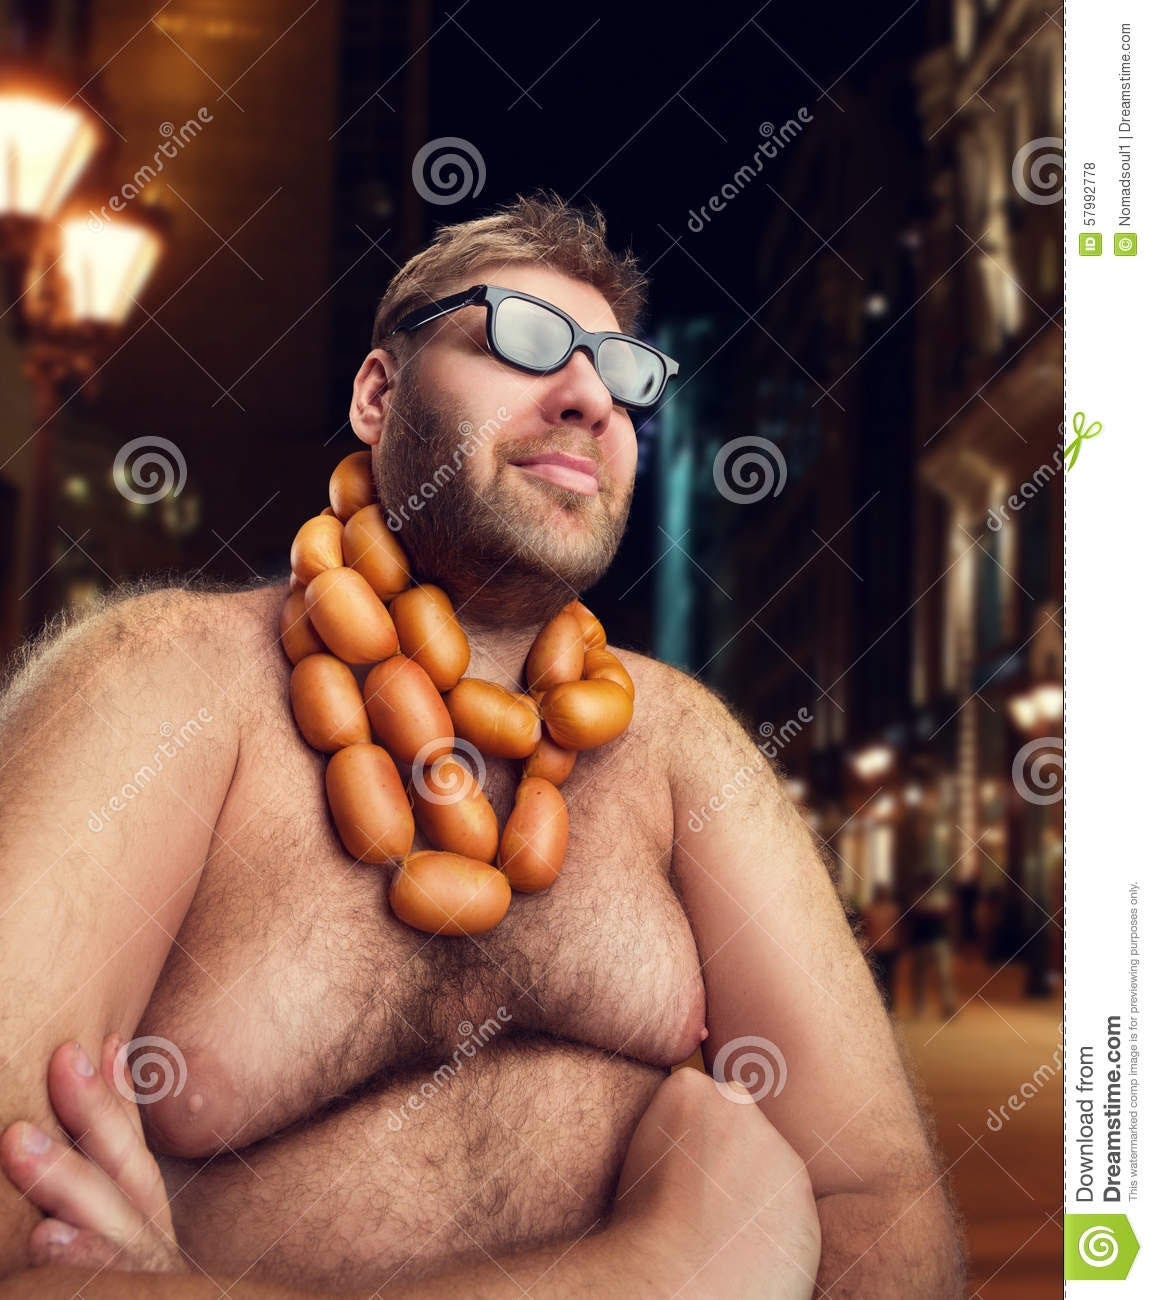 Exactly how many weird stock photos has this guy been in? : wtfstockphotos